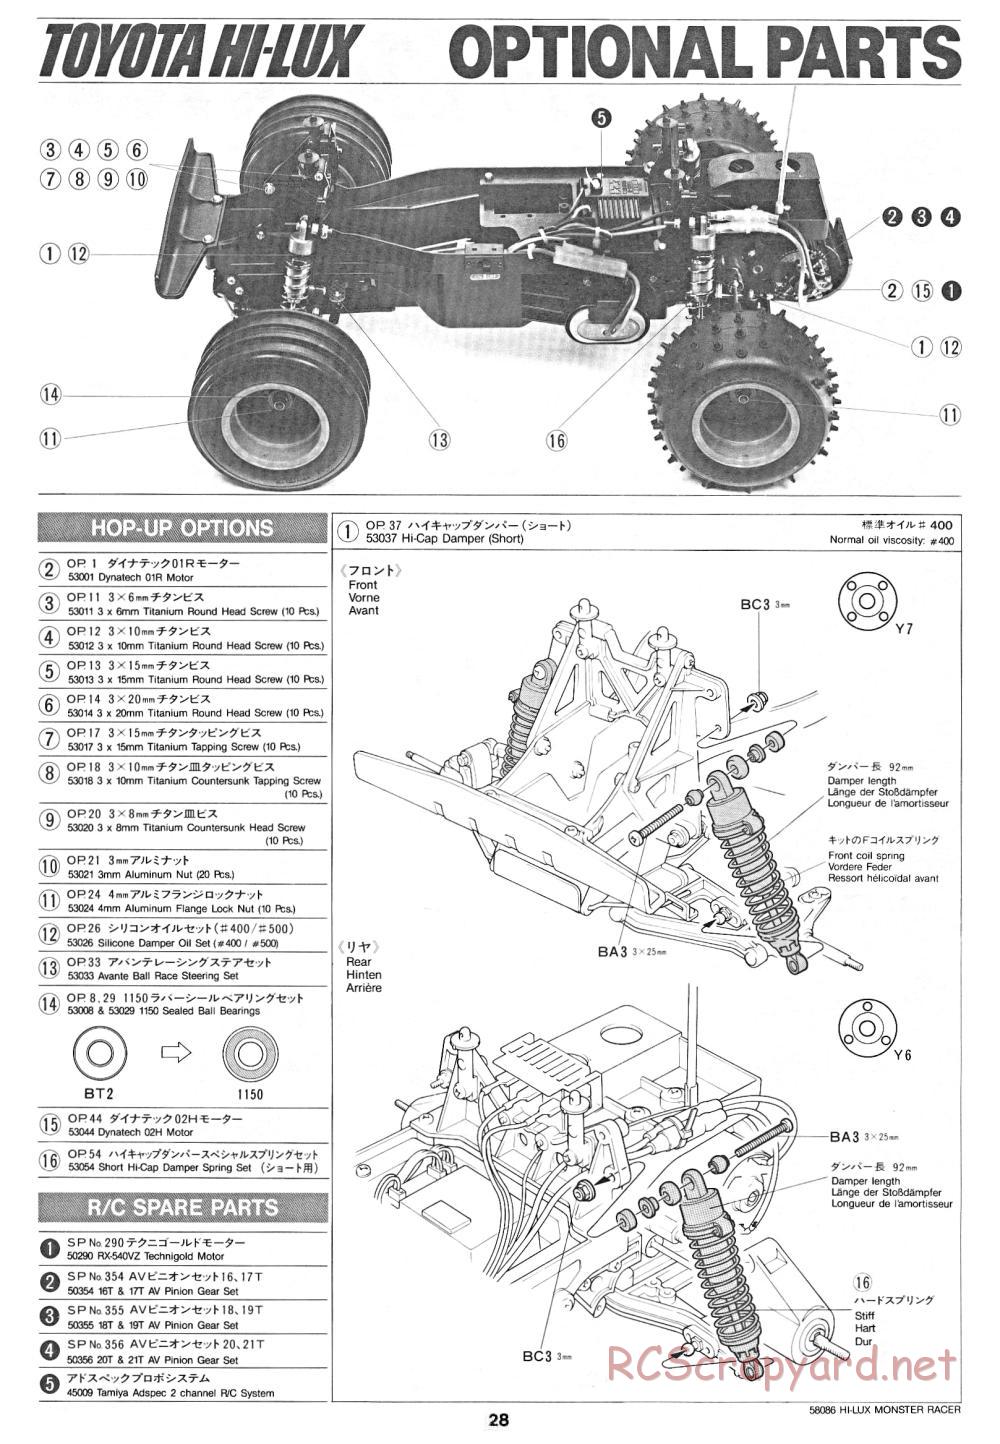 Tamiya - Toyota Hilux Monster Racer - 58086 - Manual - Page 28